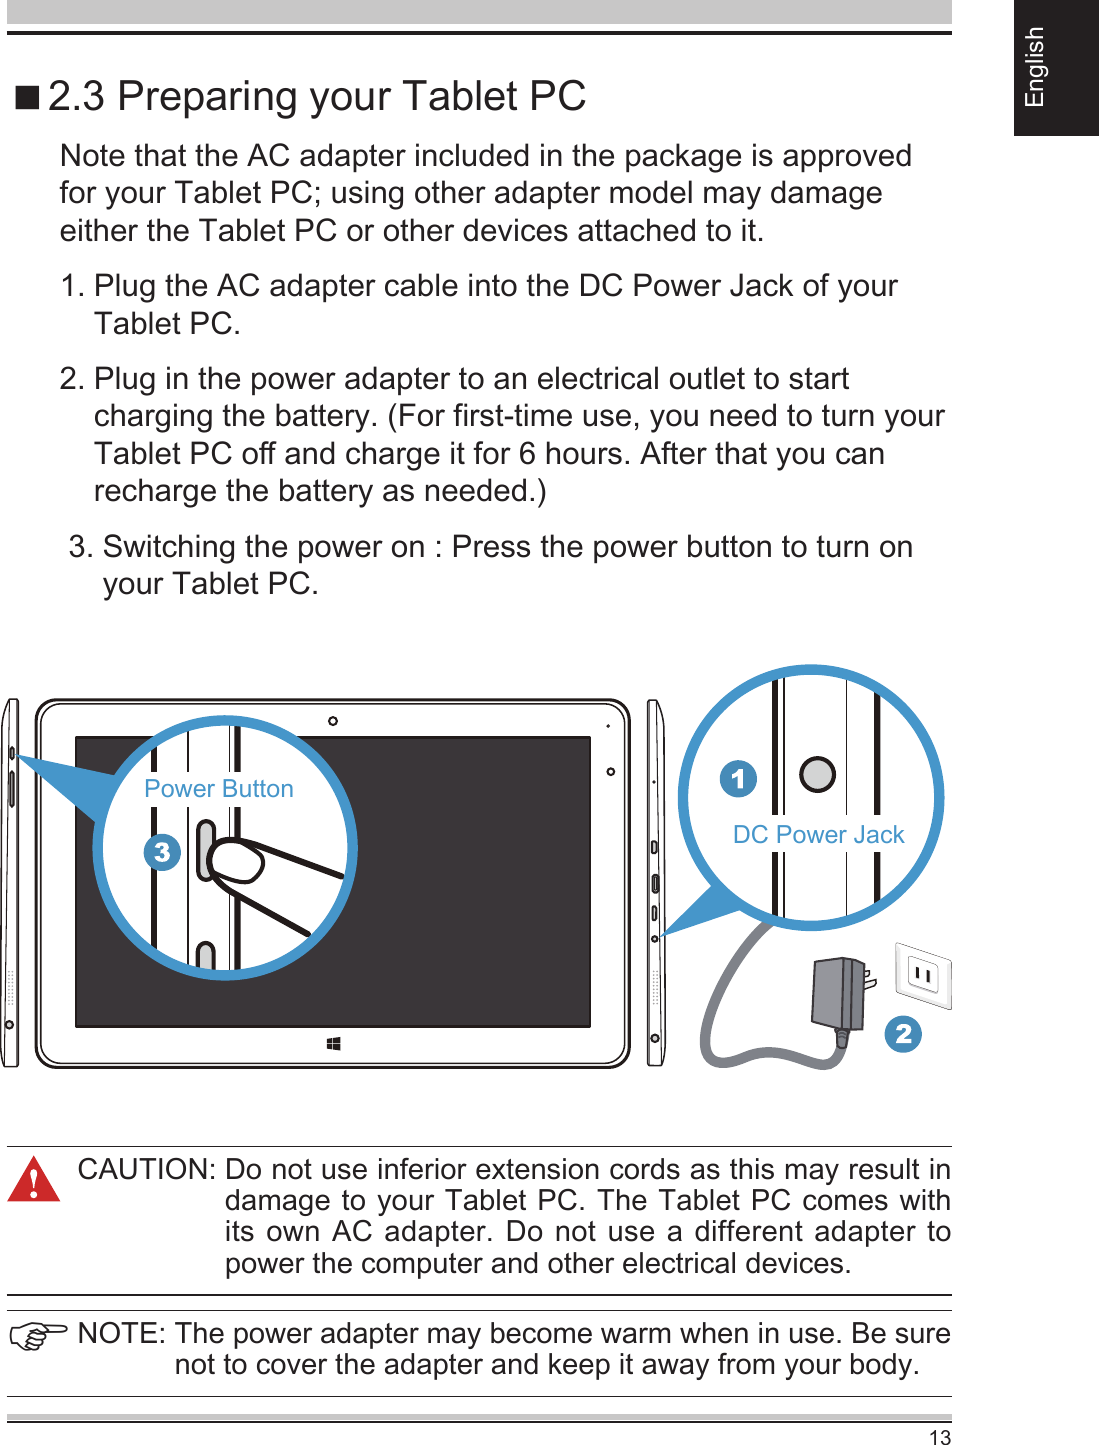 13EnglishCAUTION:  Do not use inferior extension cords as this may result in damage to your Tablet PC. The Tablet PC comes with its own AC adapter. Do not use  a different adapter to power the computer and other electrical devices. 2.3 Preparing your Tablet PCNote that the AC adapter included in the package is approved for your Tablet PC; using other adapter model may damage either the Tablet PC or other devices attached to it.1.  Plug the AC adapter cable into the DC Power Jack of your Tablet PC.2.  Plug in the power adapter to an electrical outlet to start charging the battery. (For rst-time use, you need to turn your Tablet PC o and charge it for 6 hours. After that you can recharge the battery as needed.)   3.  Switching the power on : Press the power button to turn on your Tablet PC.NOTE:  The power adapter may become warm when in use. Be sure not to cover the adapter and keep it away from your body.DC Power JackPower Button